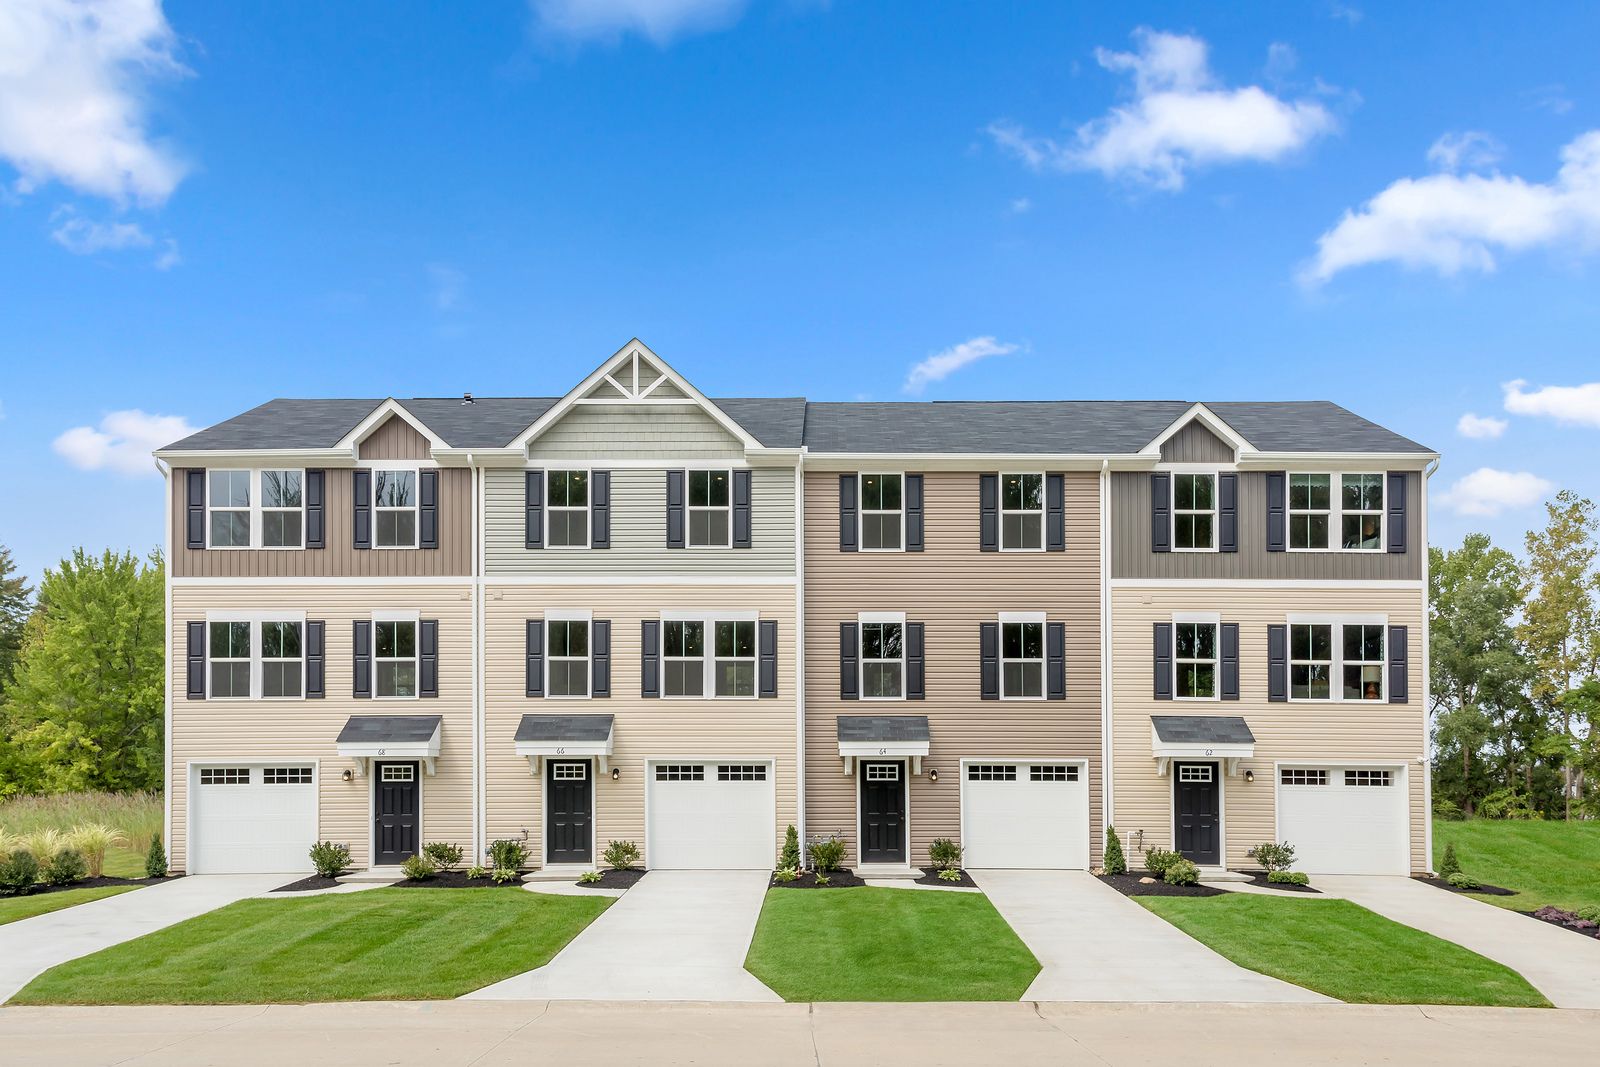 Own a townhome for the best value in the area!